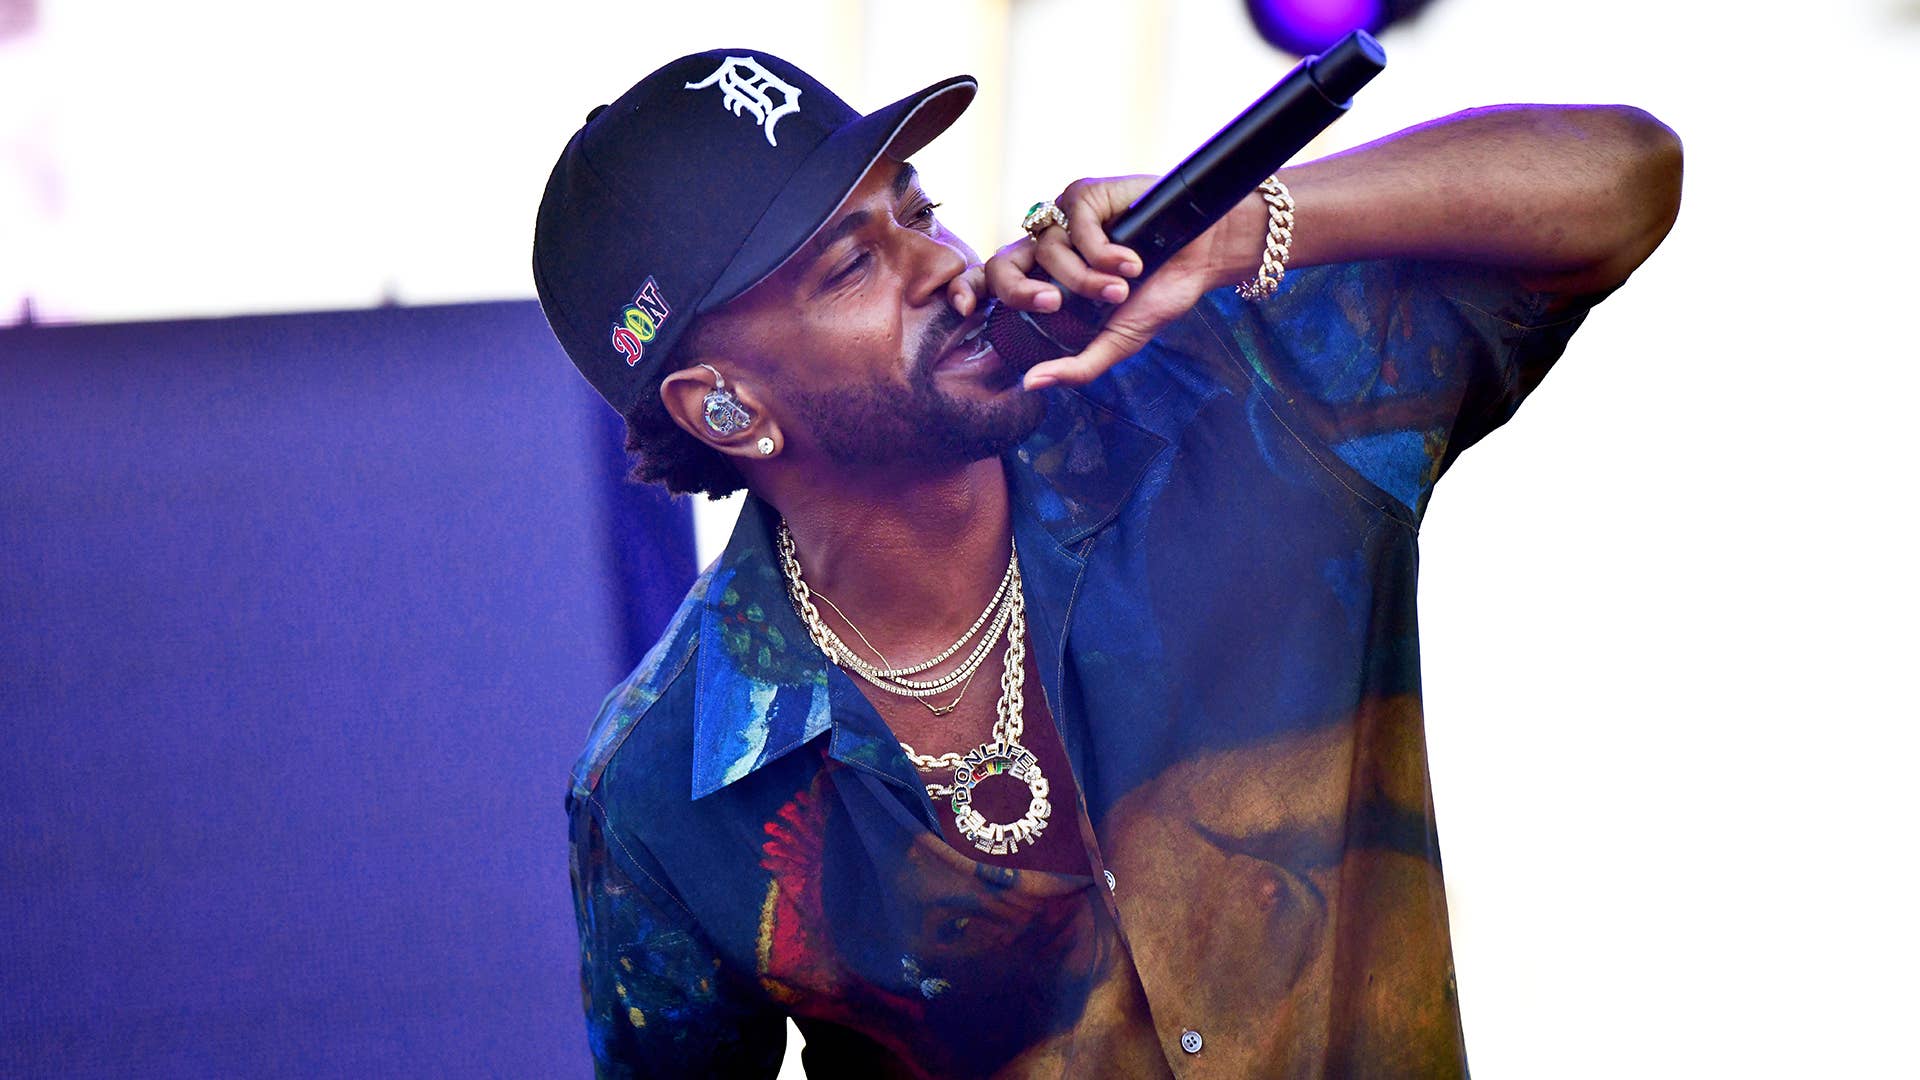 This is a photo of Big Sean.